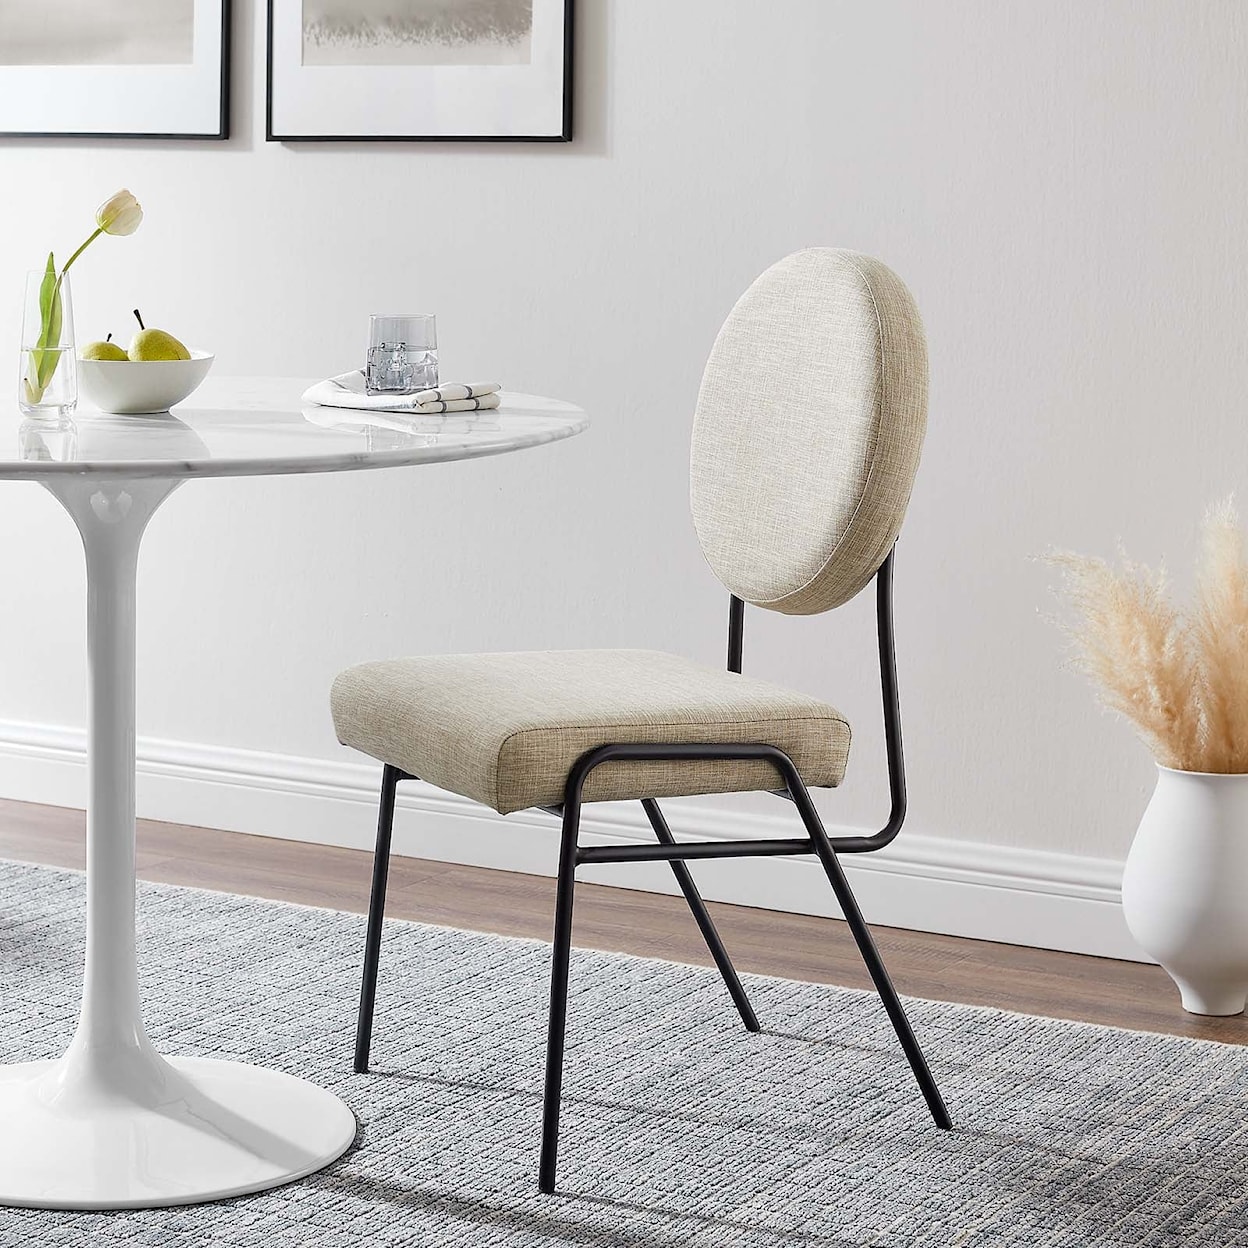 Modway Craft Dining Chair